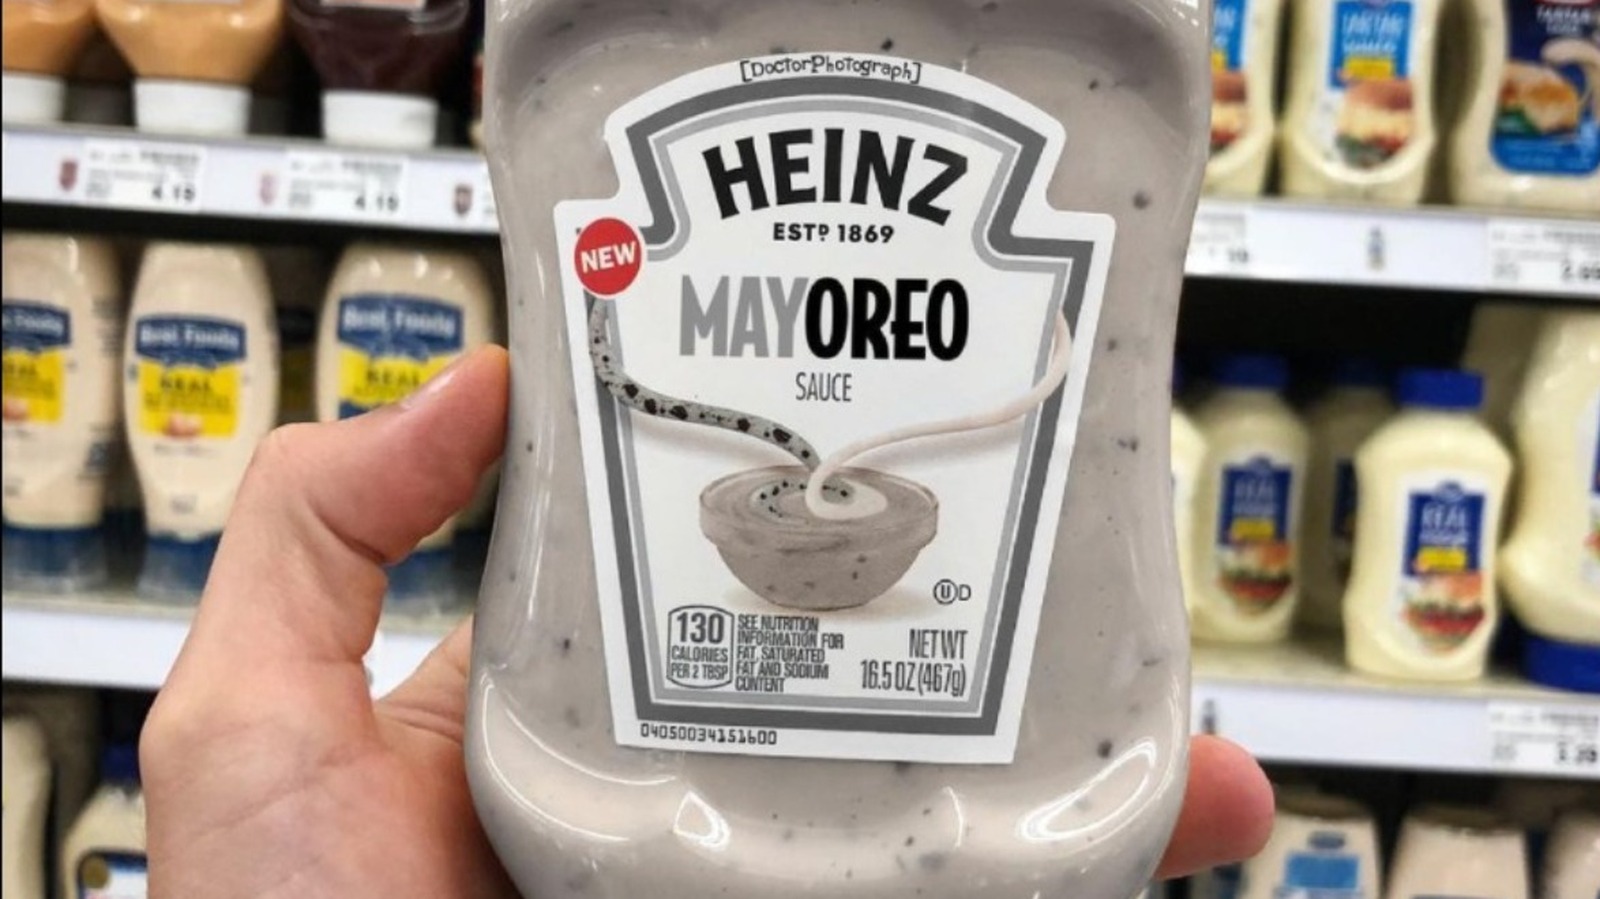 Does Heinz Mayoreo Sauce Really Exist? - Mashed